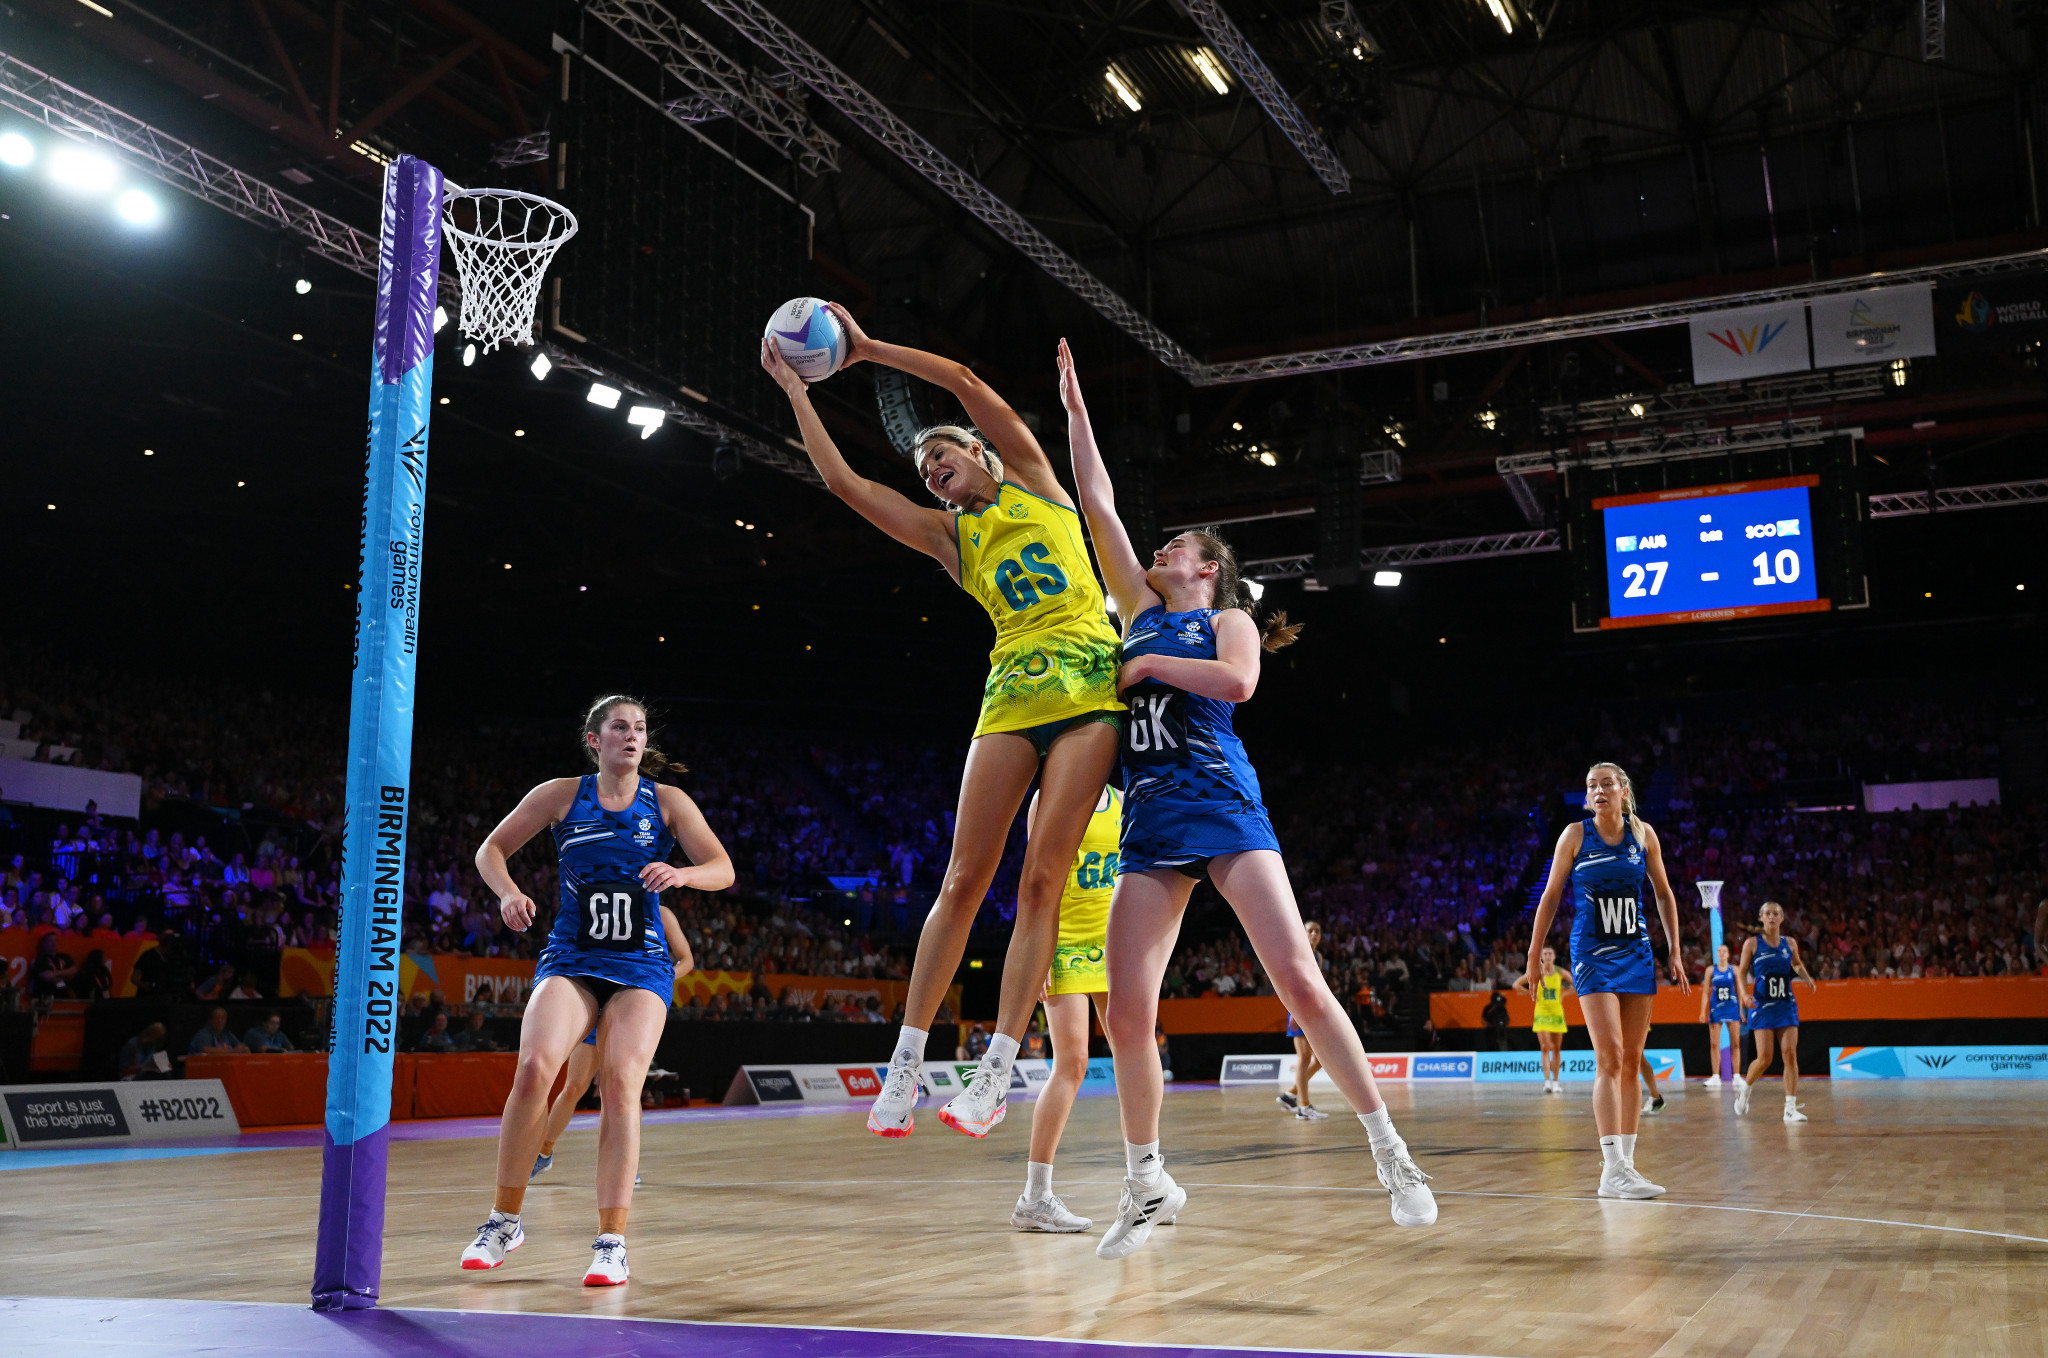 Liz Nicholl hopes Australia's strong netball heritage will aid a bid for Olympic inclusion at Brisbane 2032 ©Getty Images